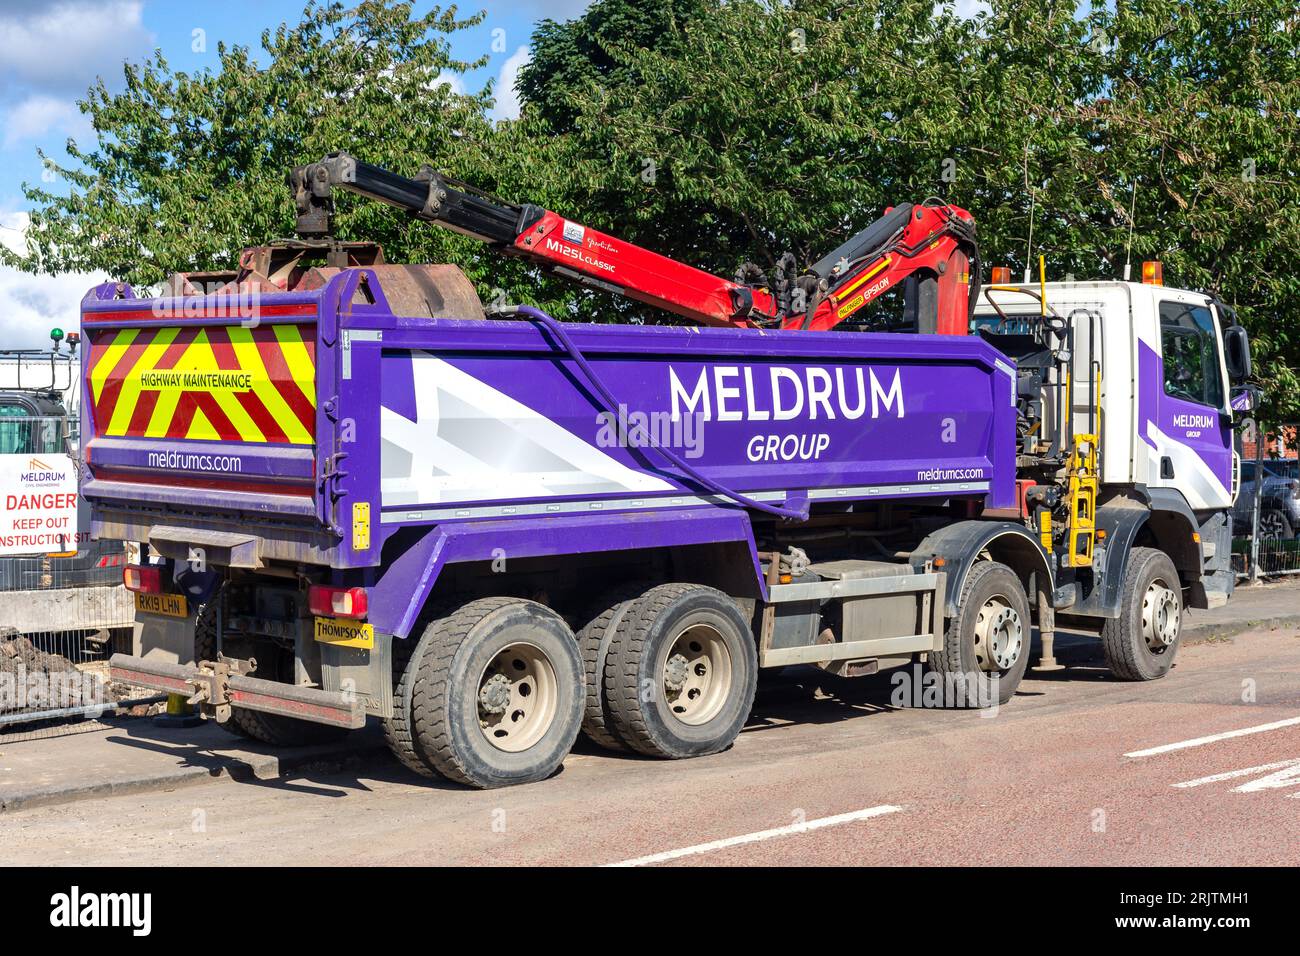 Pala gommata Meldrum Group in cantiere, St James Road, Gateshead, Tyne and Wear, Inghilterra, Regno Unito Foto Stock